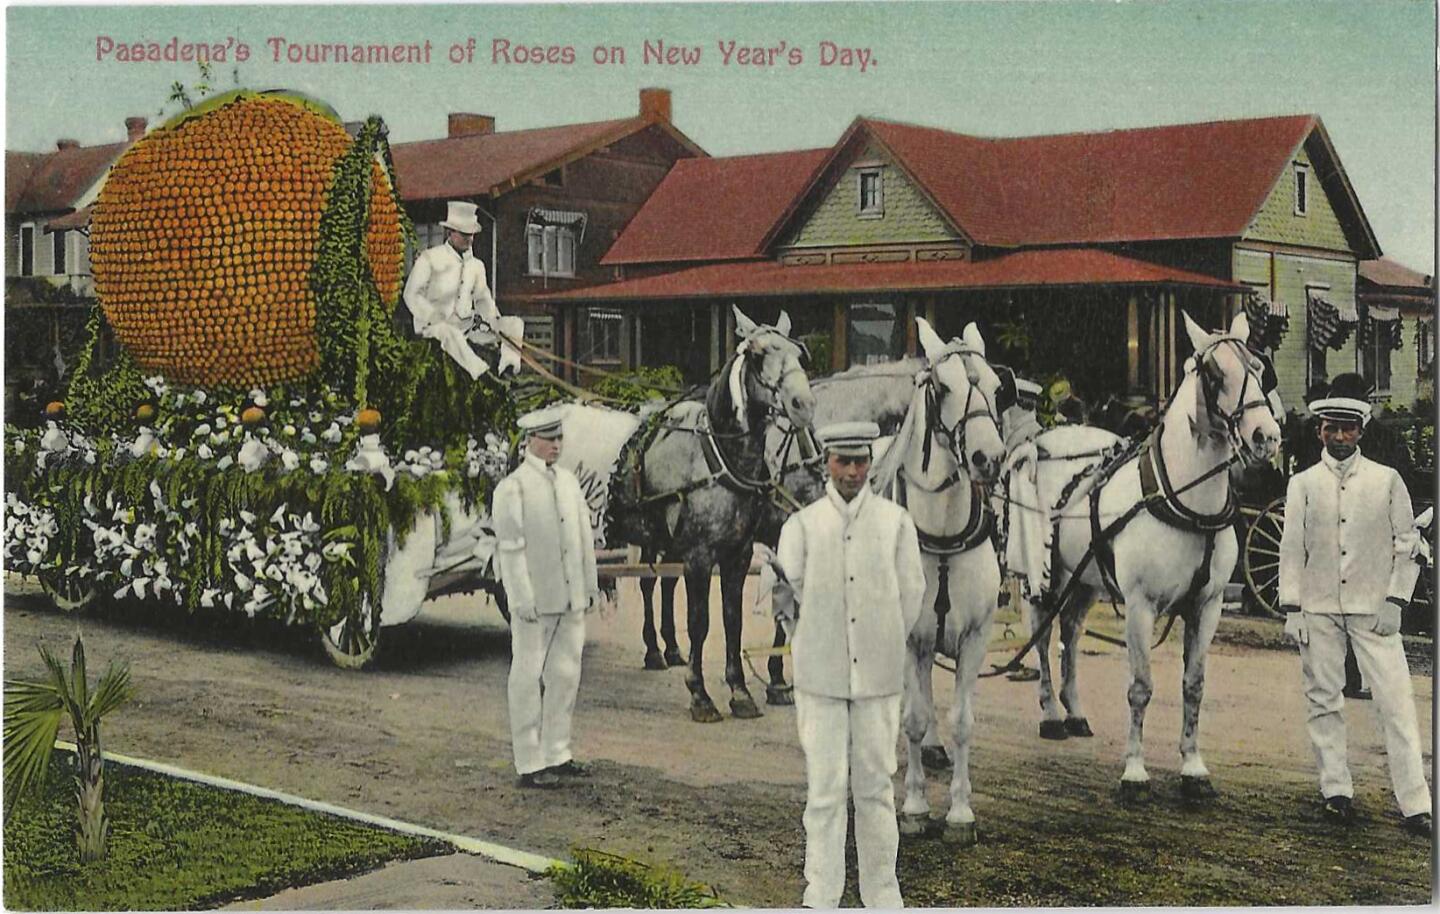 A large orange on a flower-decked float. Men in white uniforms stand near a small team of horses